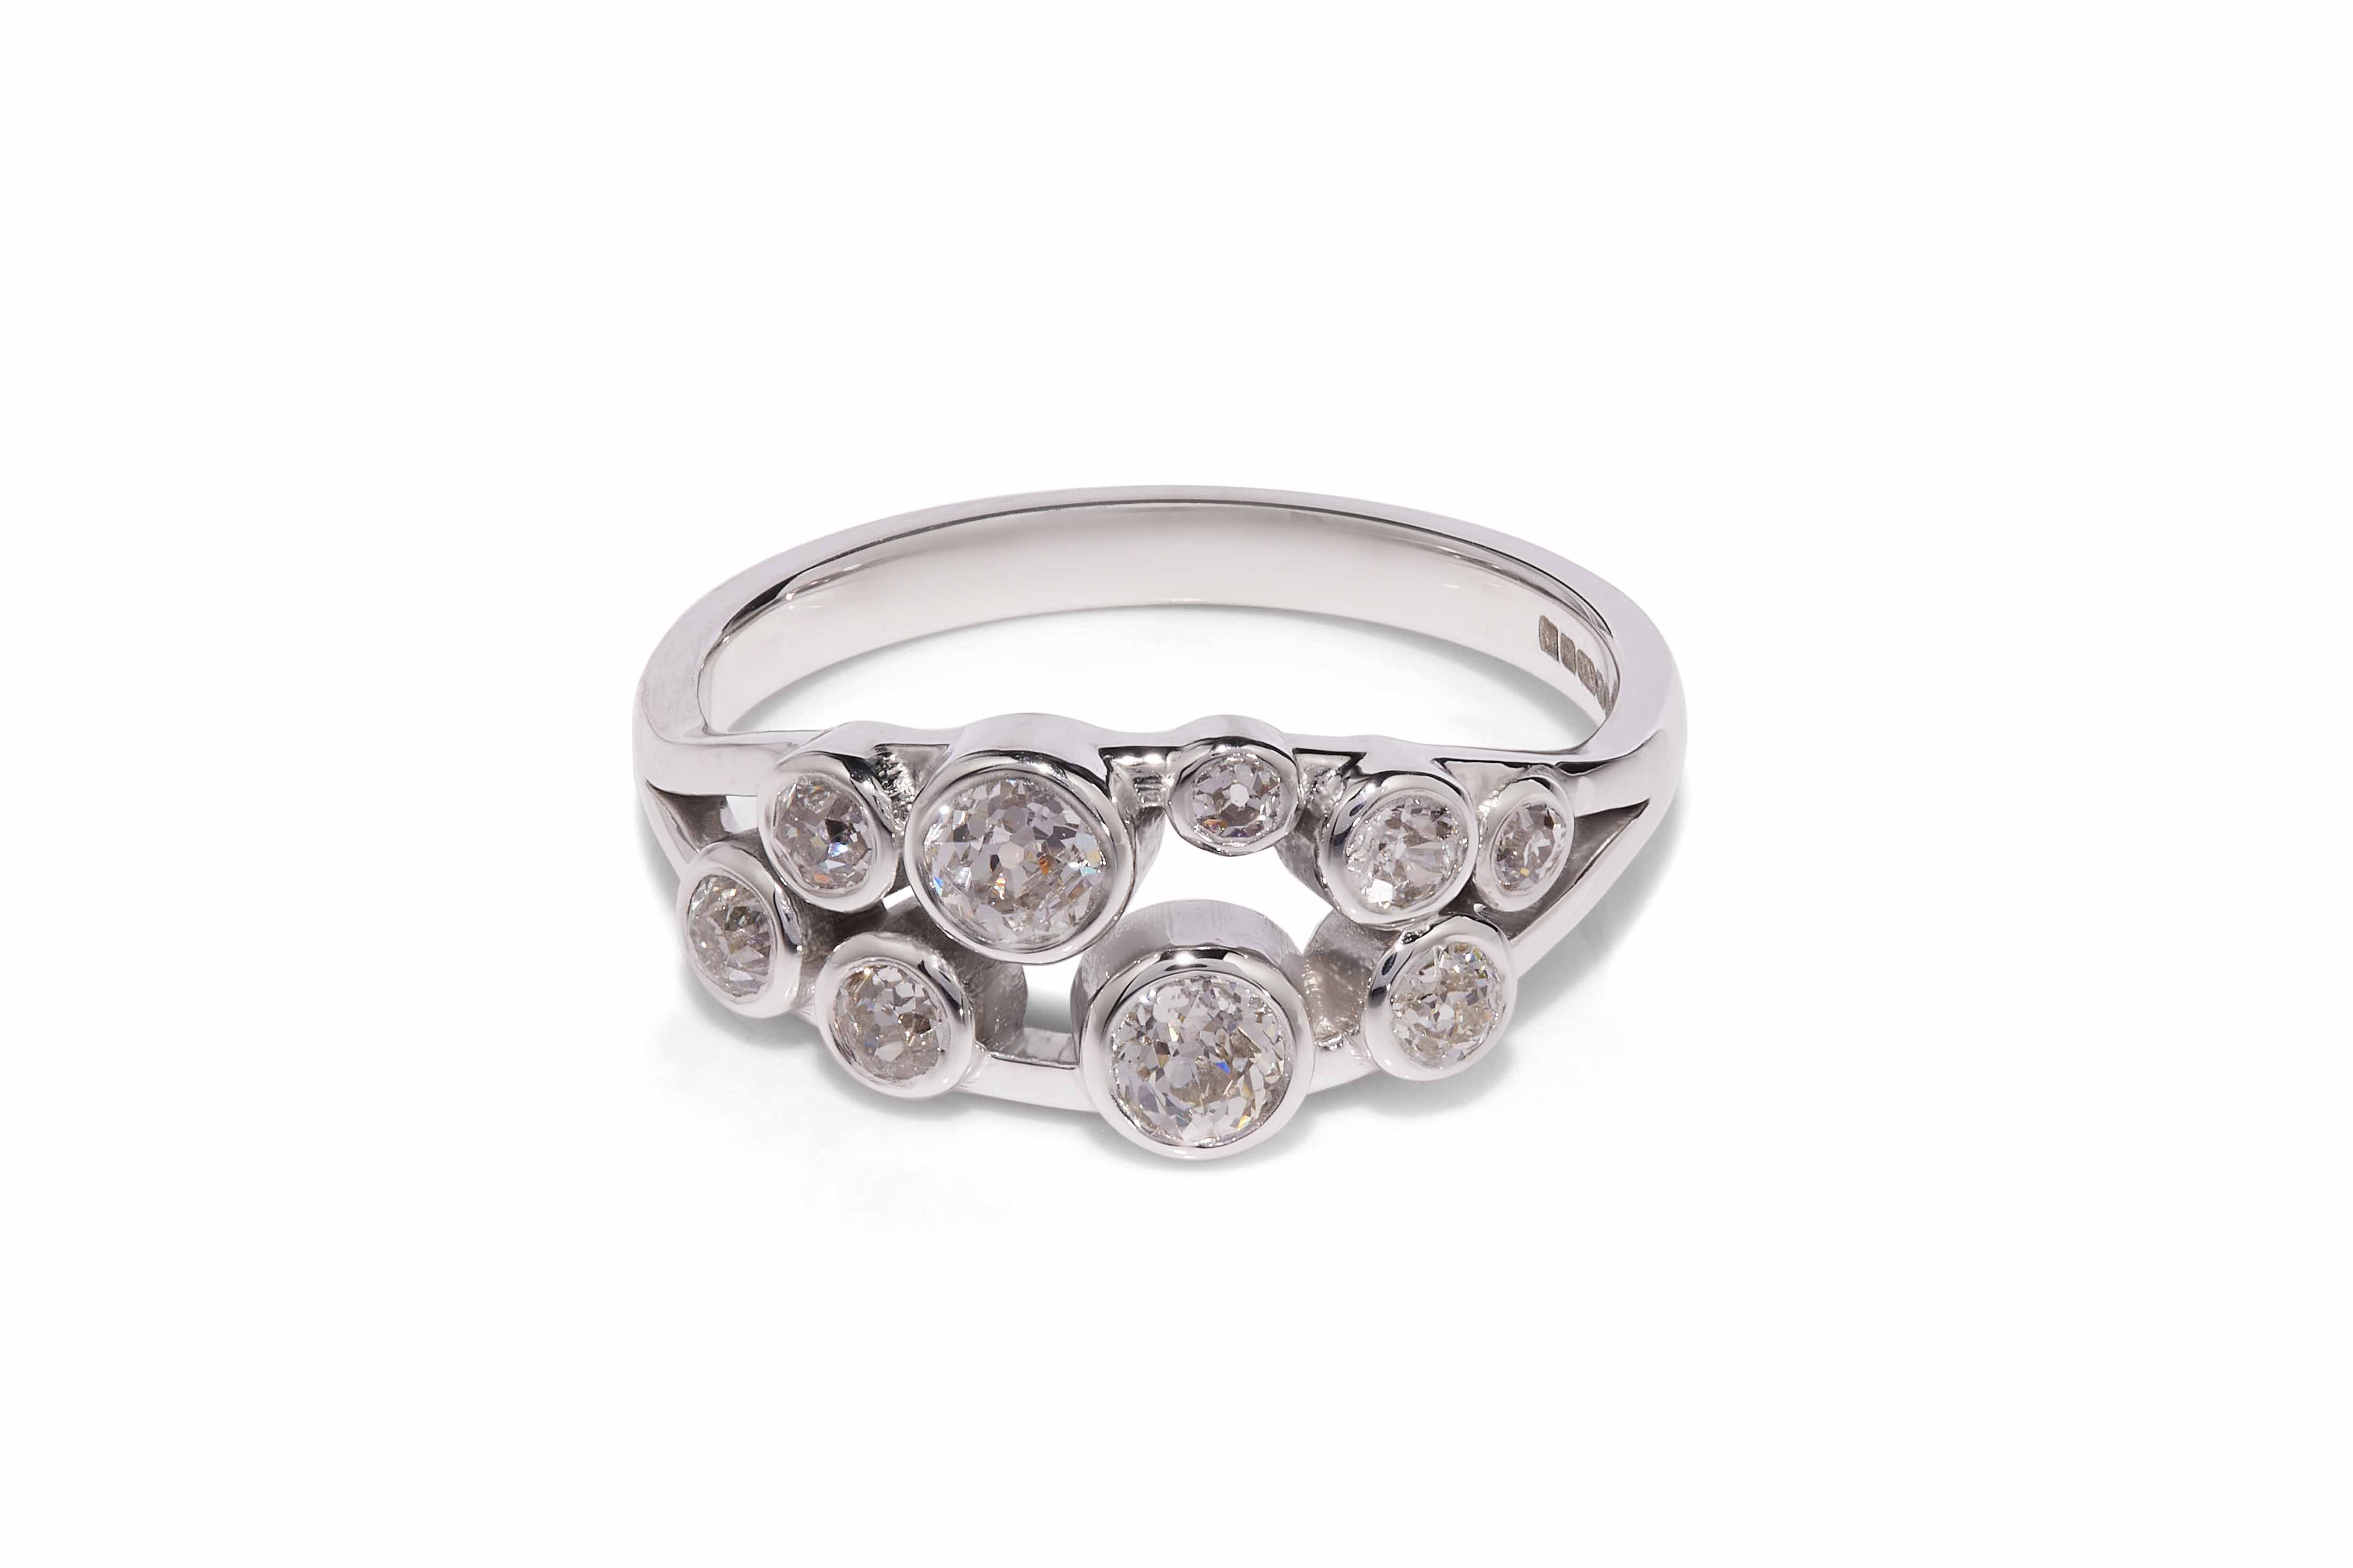 Multi-stone, bezel set diamond ring with split band made in platinum lying on white background with shadow